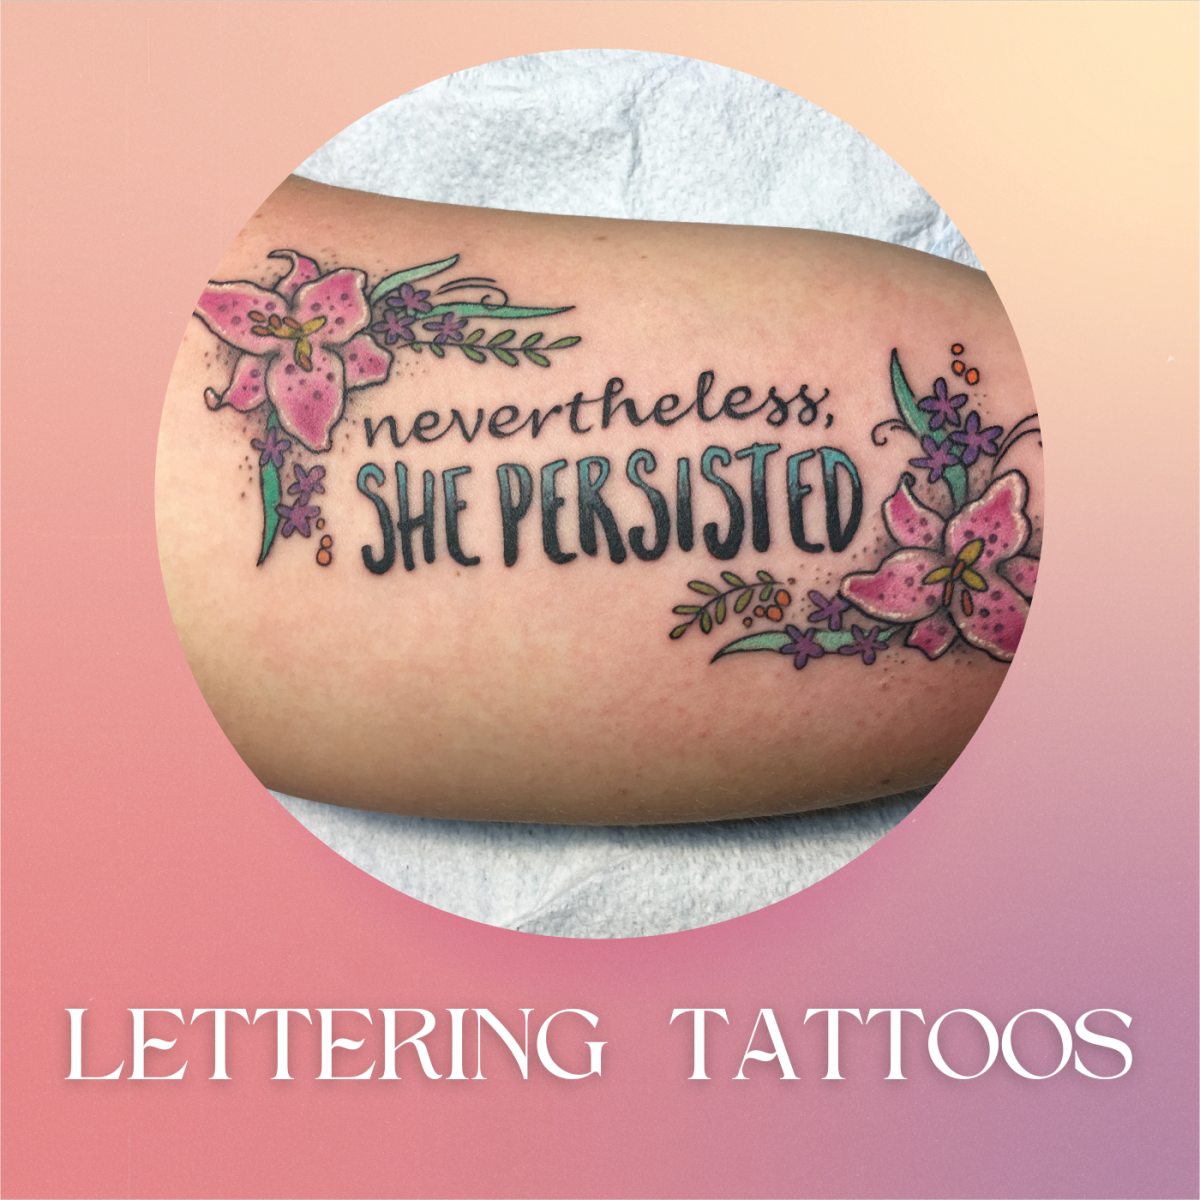 Tattoo Lettering Ideas: Deciding What to Get